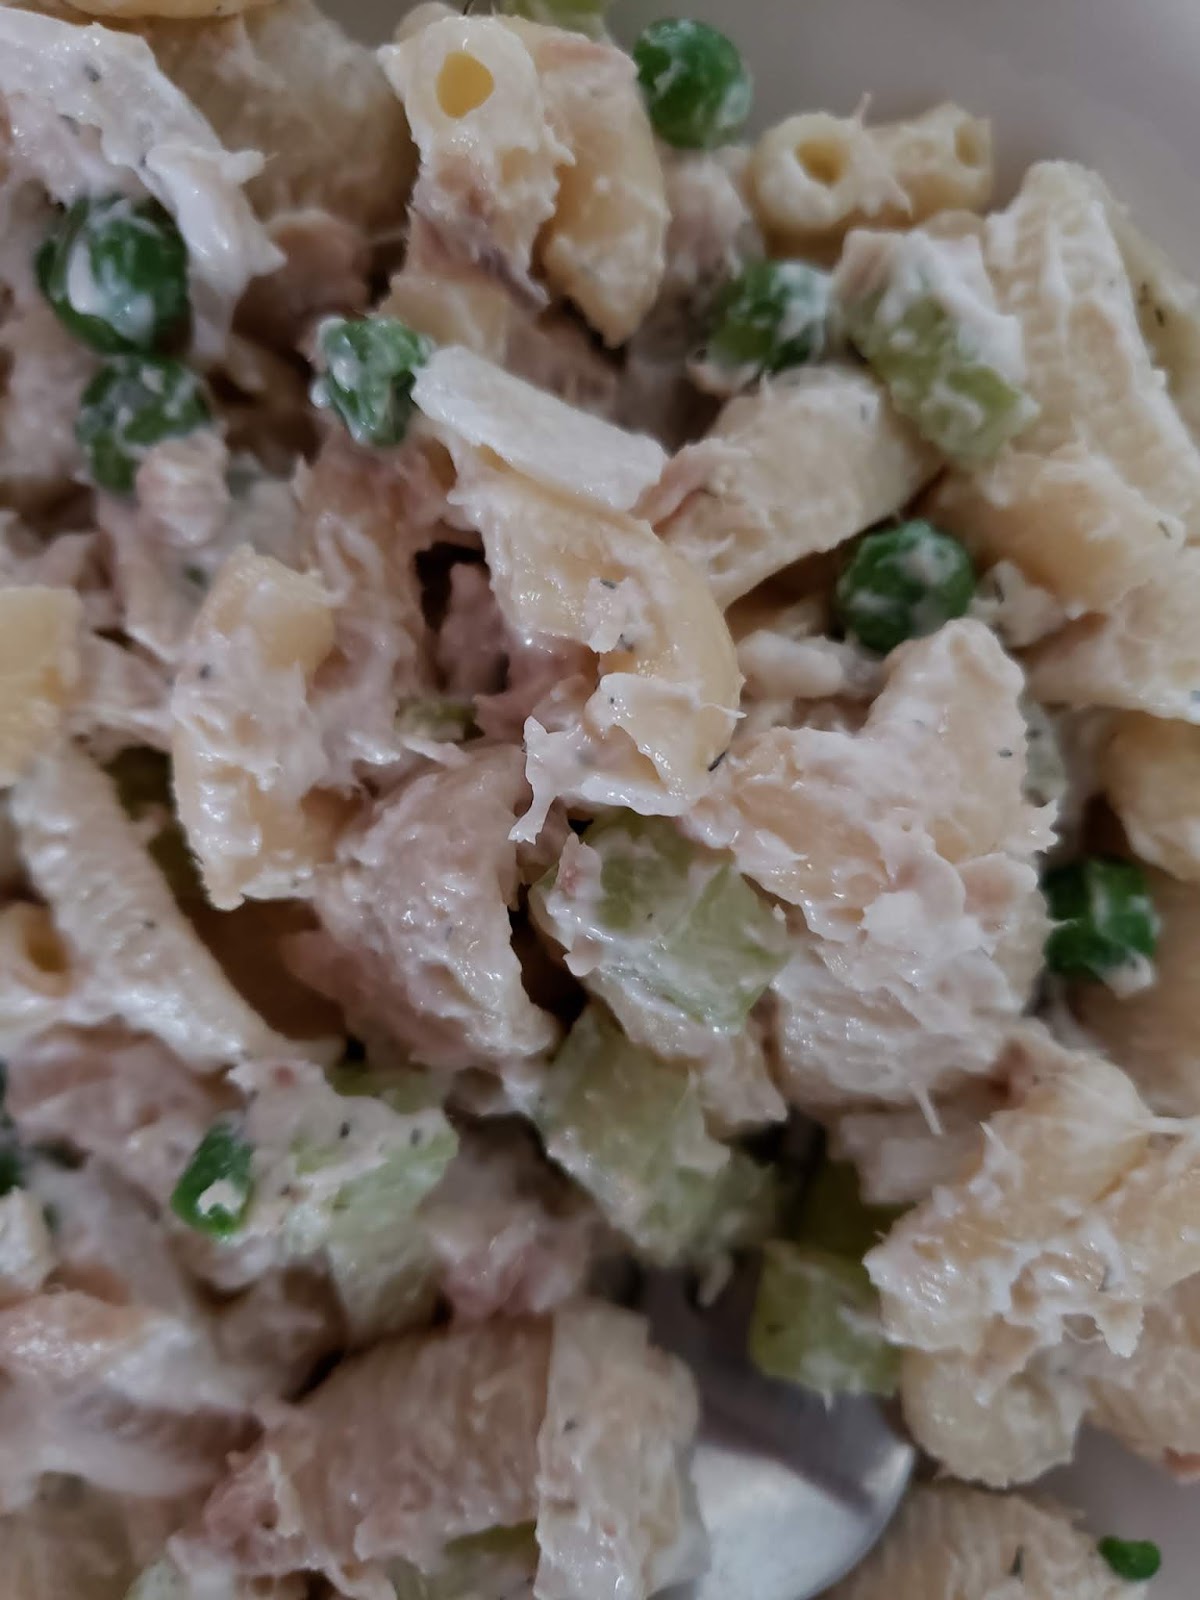 Gear Acres at Top of the Hill: Grandmother's Tuna Salad Recipe and Update